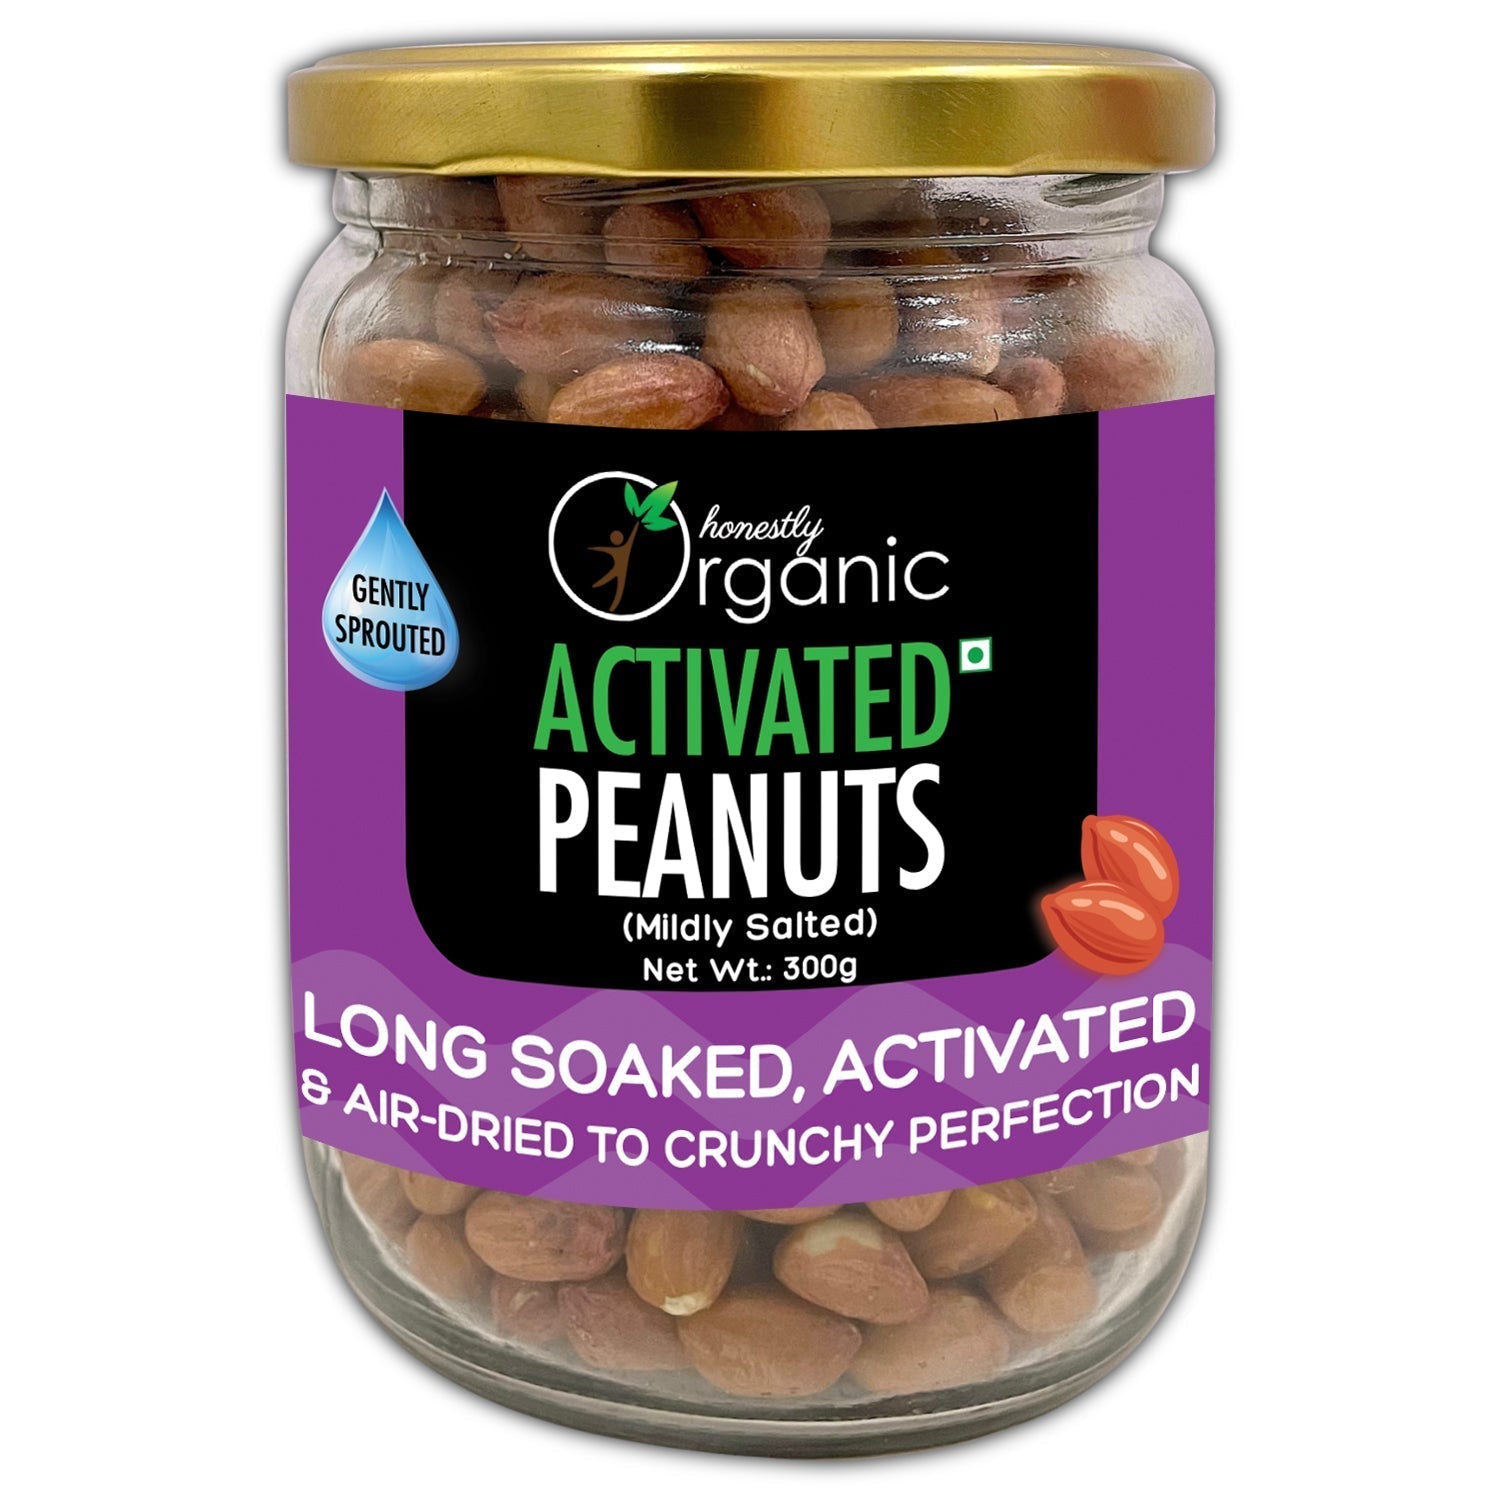 D-Alive Honestly Organic Activated Peanuts (Mildly Salted) - buy in USA, Australia, Canada